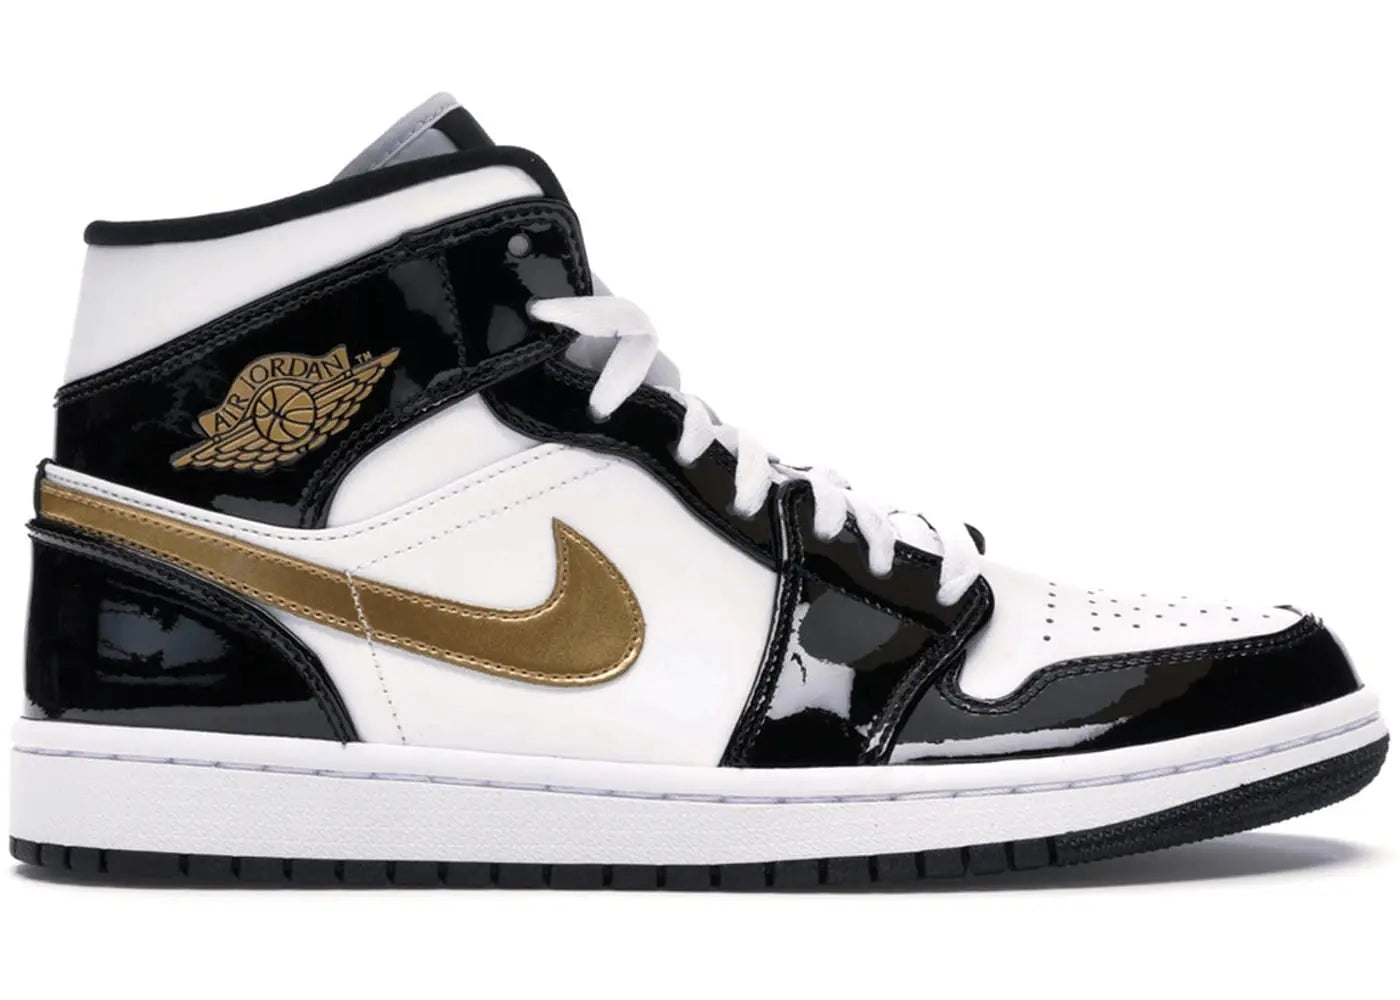 Jordan 1 Mid Patent Black White Gold in Auckland, New Zealand - Shop name